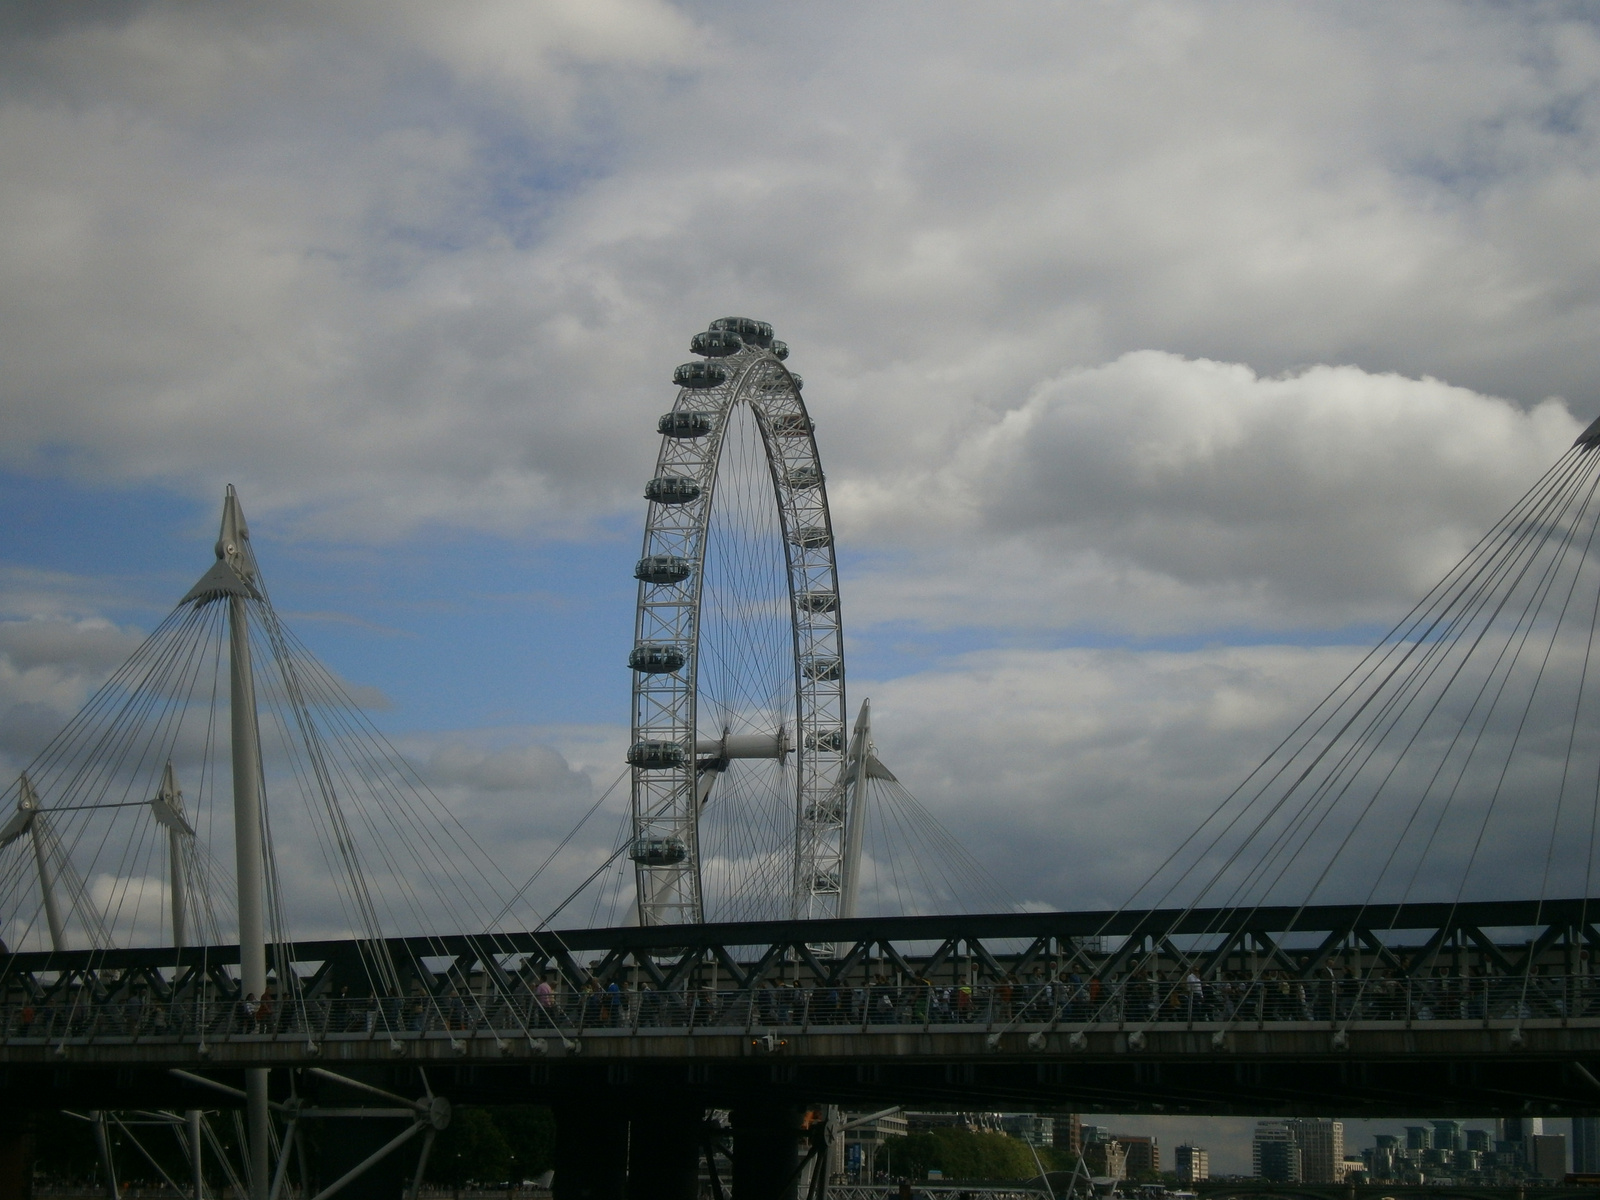 D4 the London Eye from the Thames